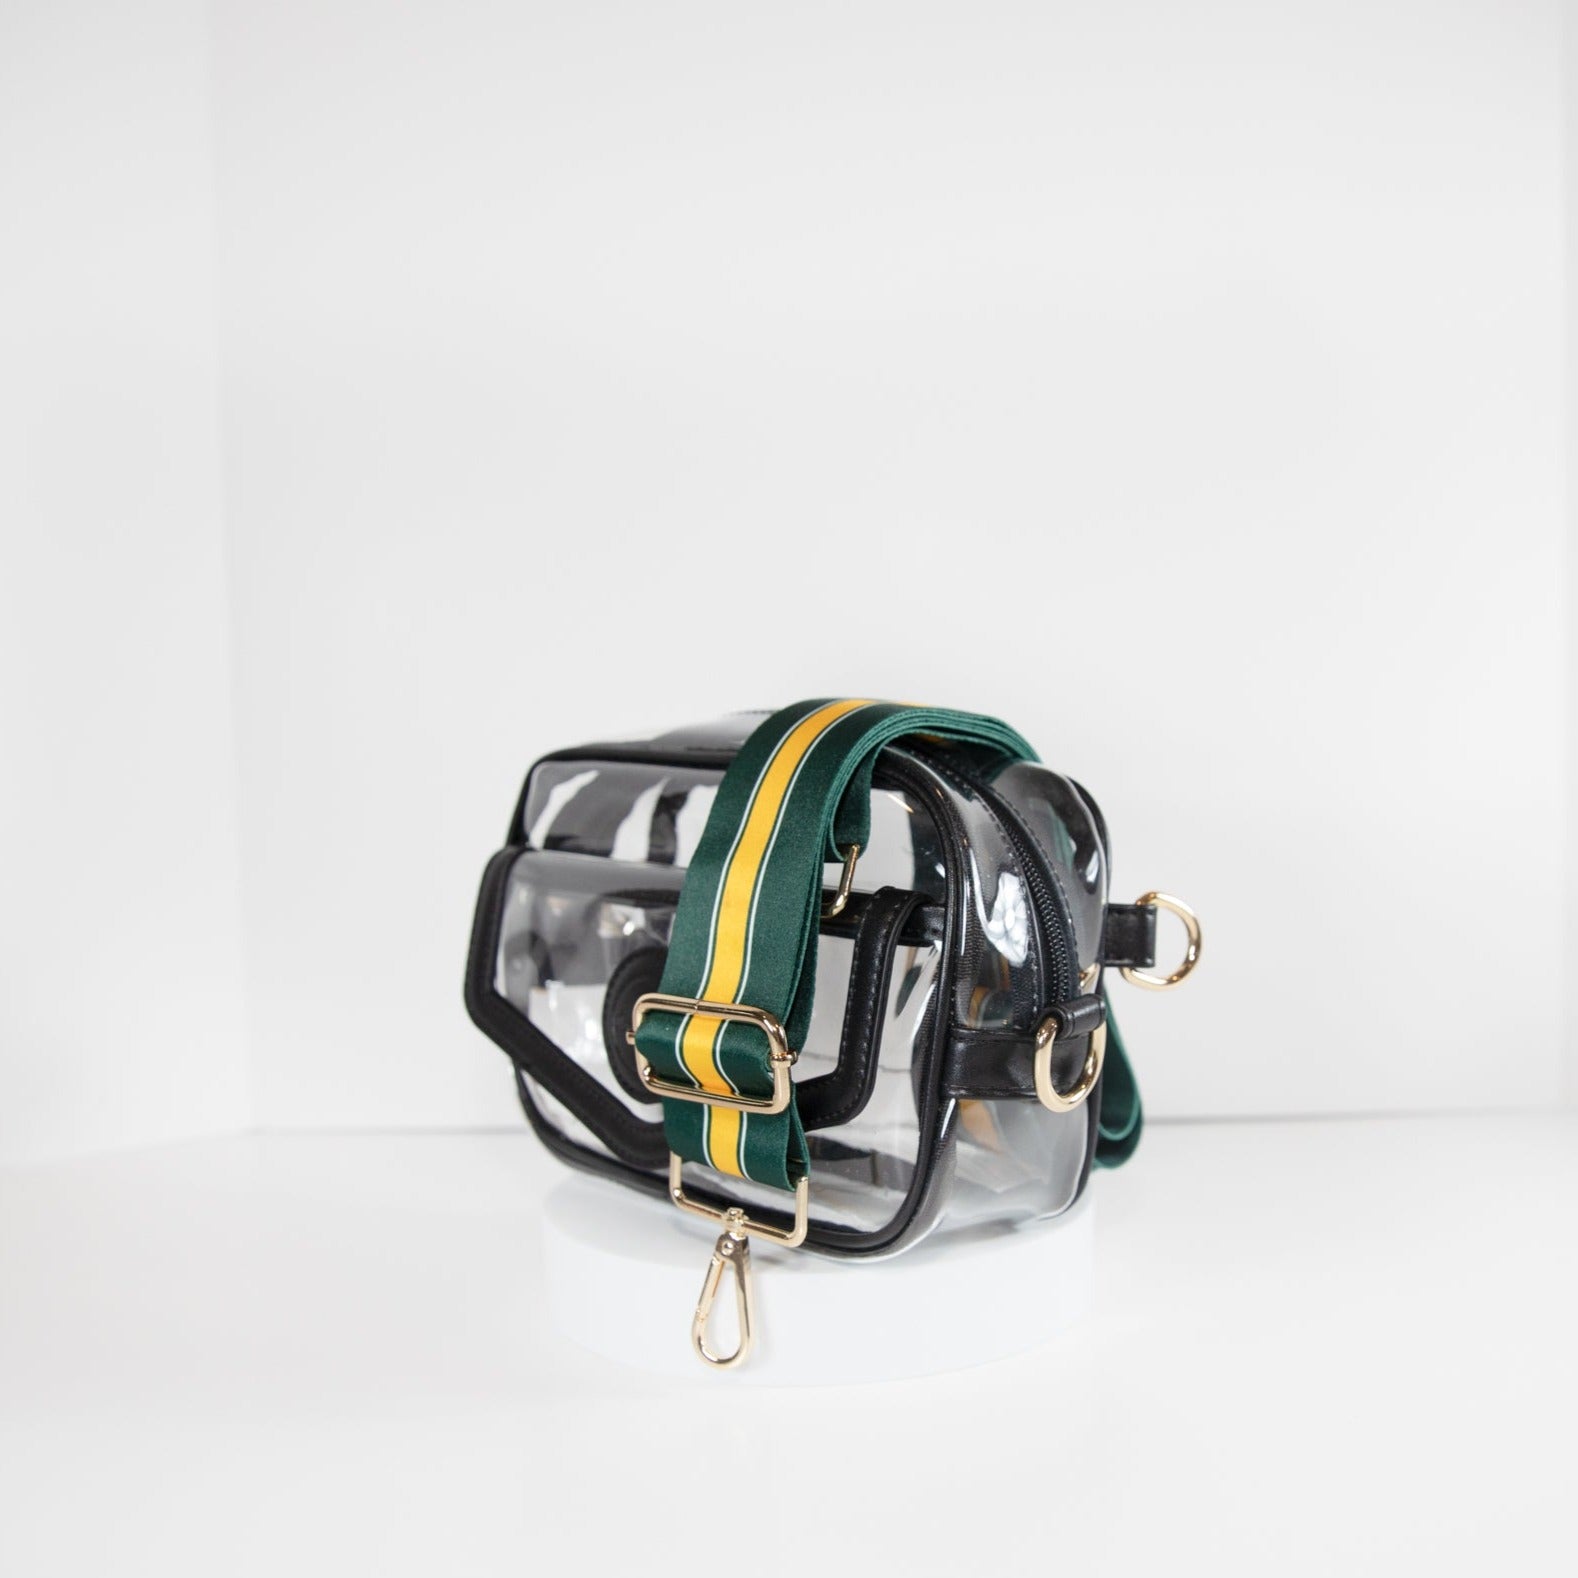 Clear Stadium Bag in black leather trim, side facing, with a strap in the team colors of the Green Bay Packers.